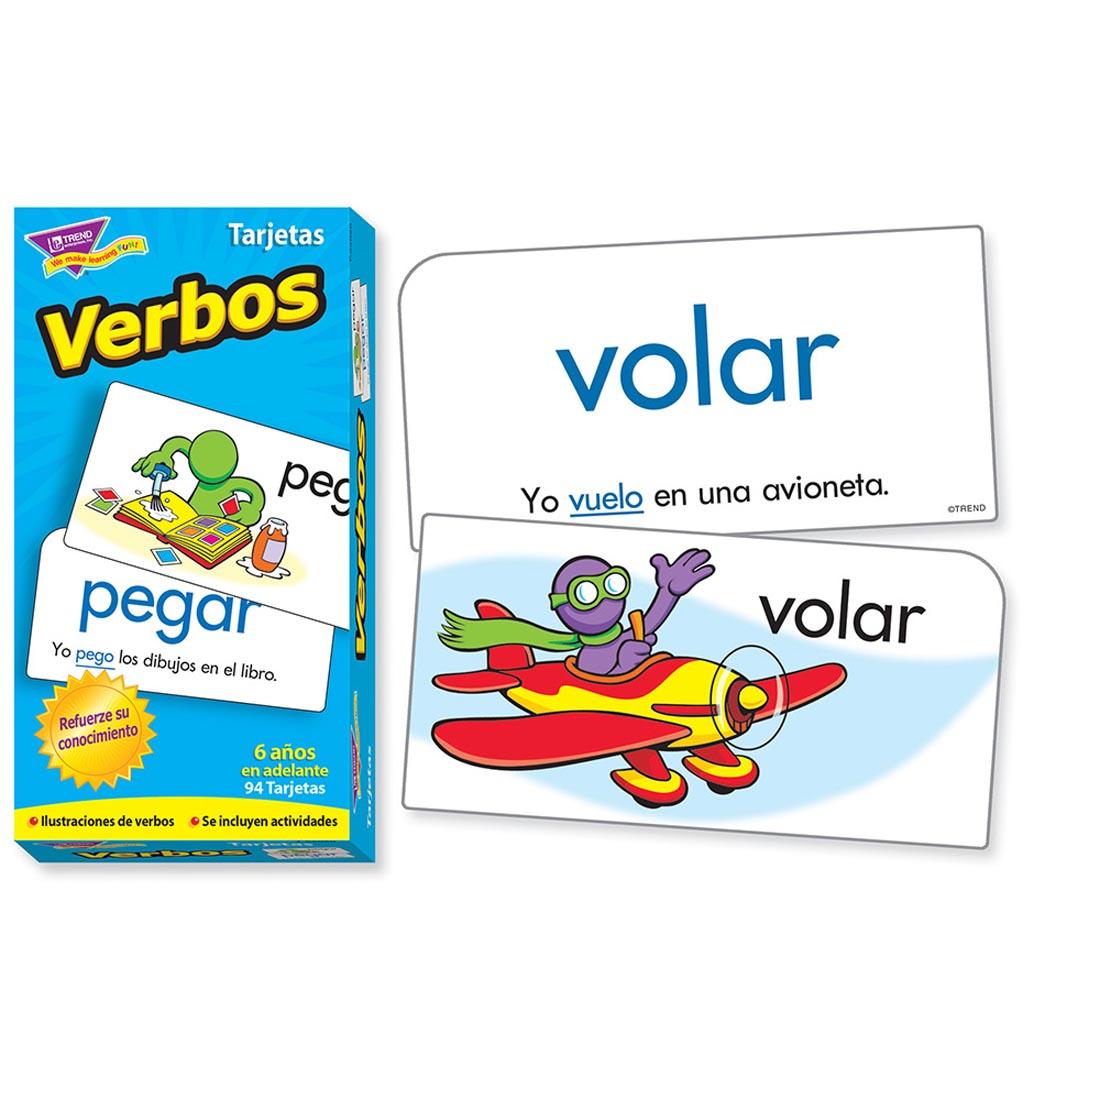 TREND Verbos Spanish Action Words Skill Drill Flash Cards